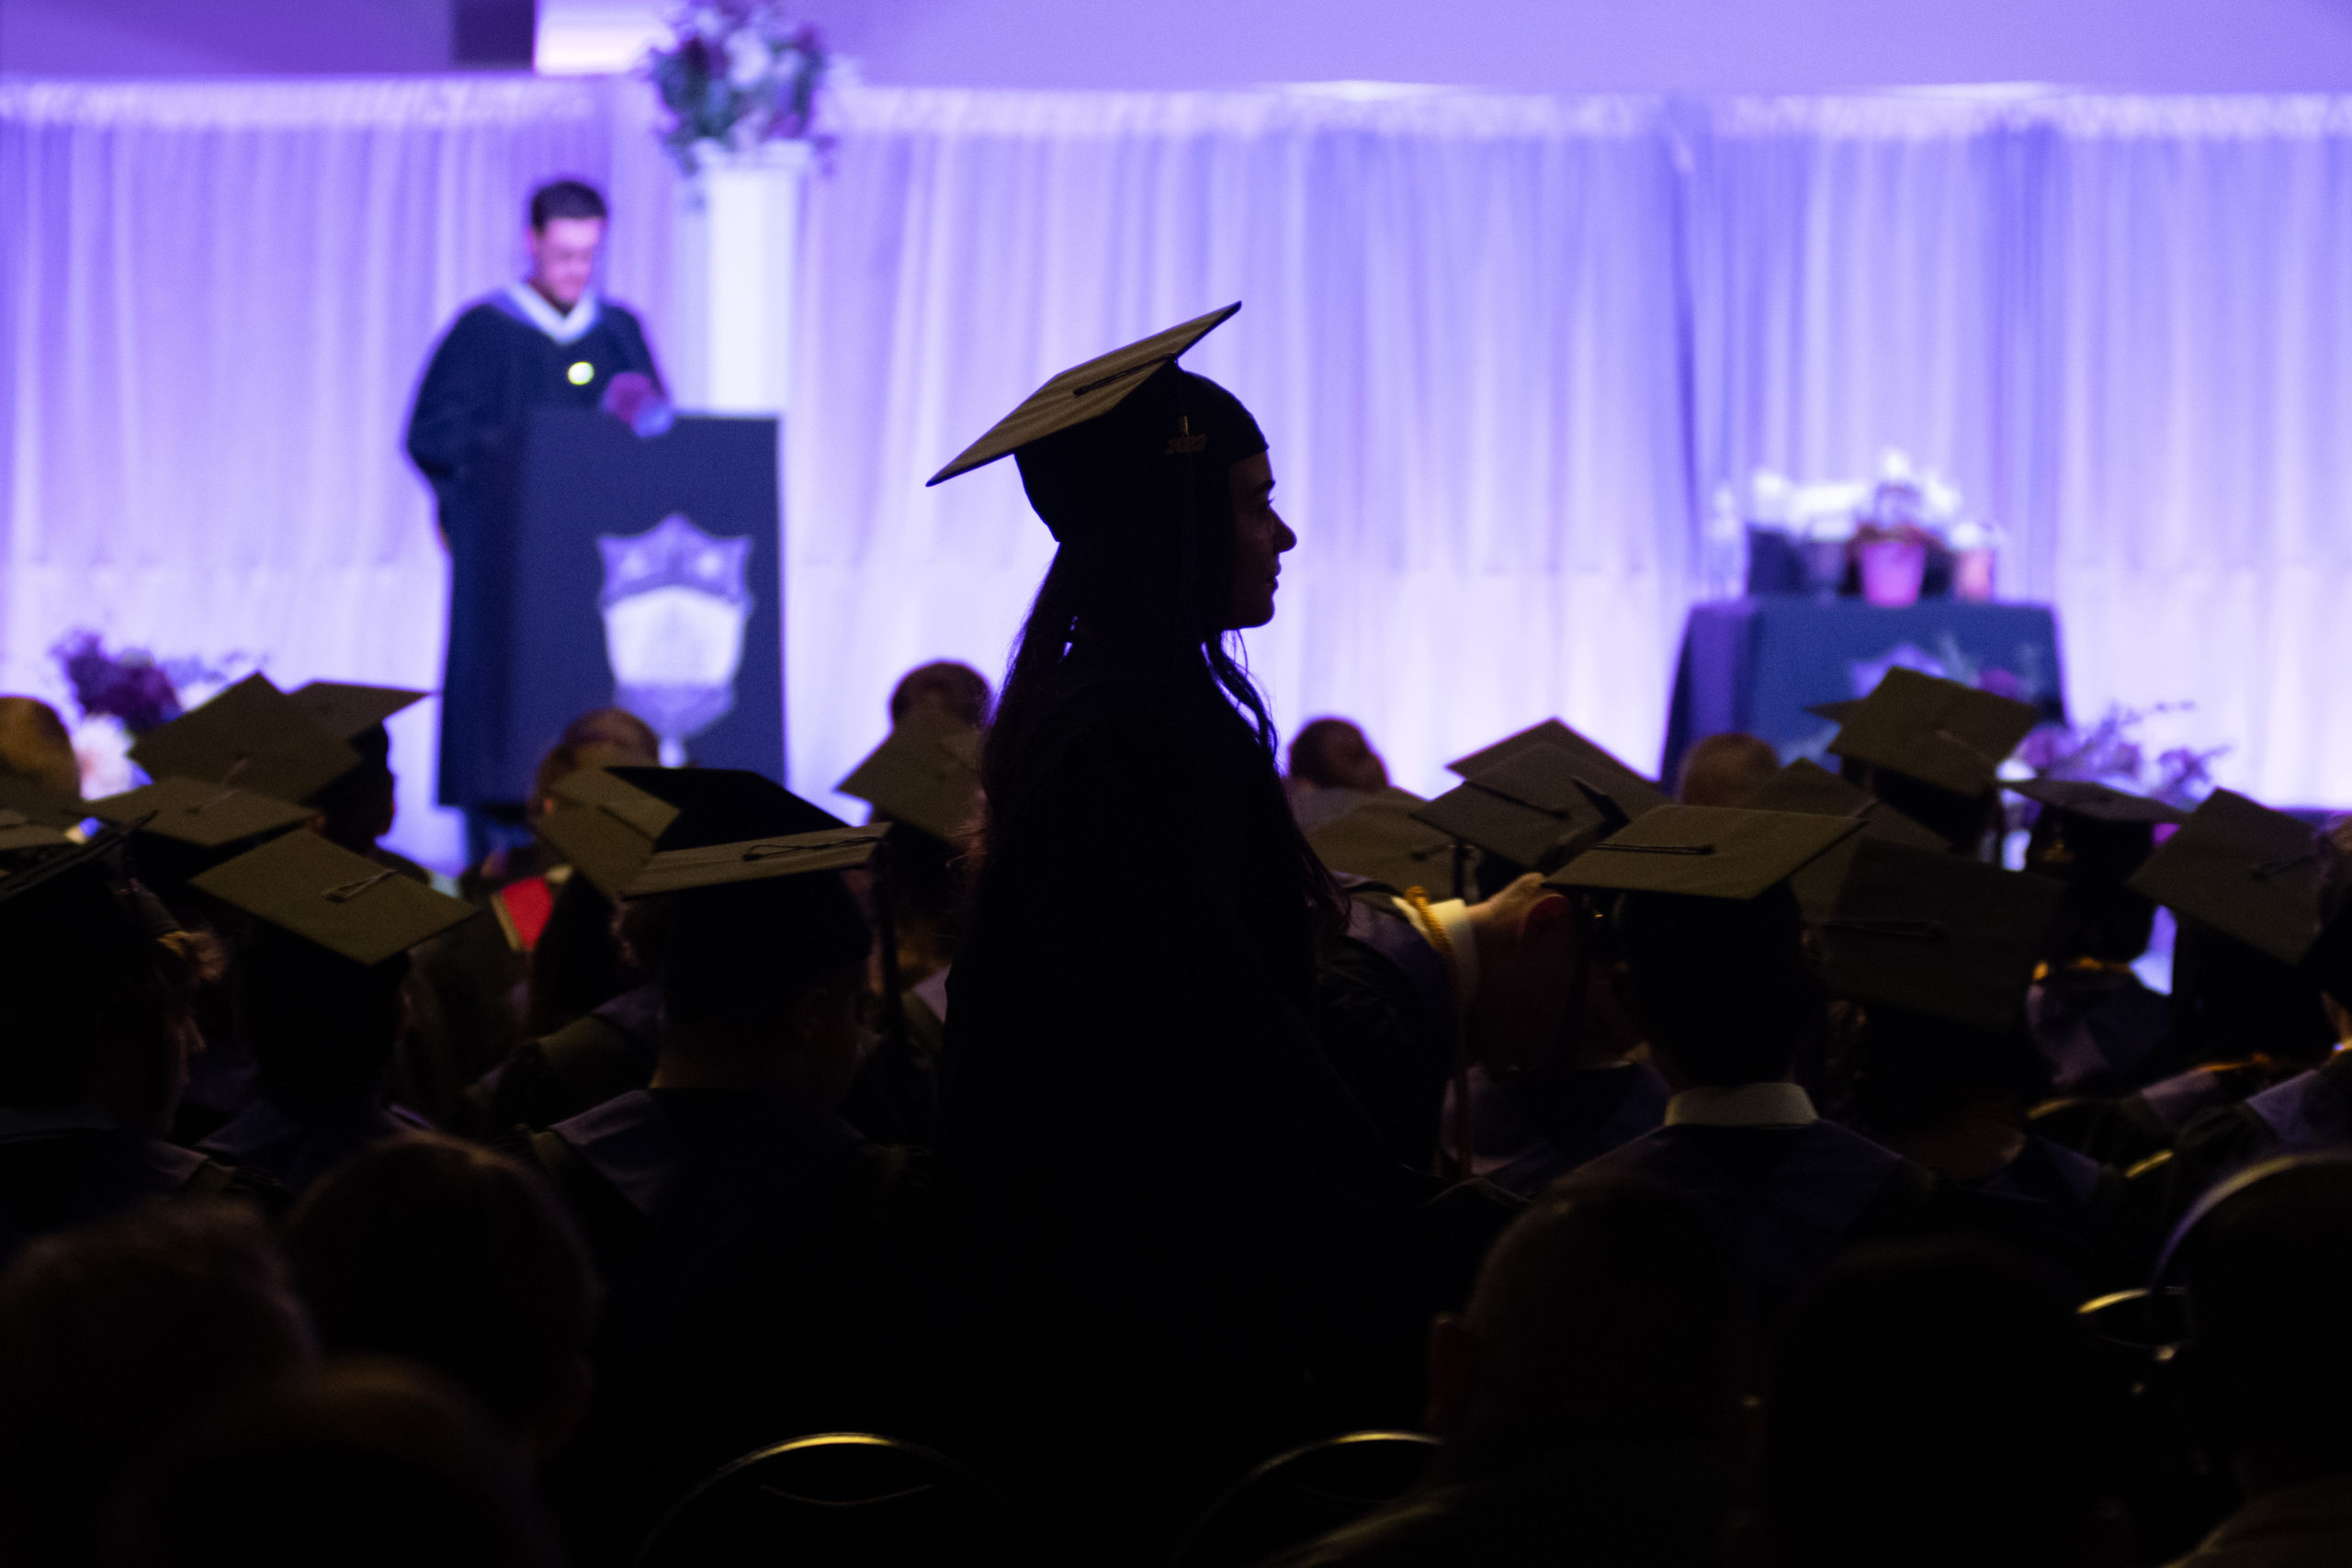 A student in a graduation cap is silhouetted against a purple-lit background as they walk to go and receive their diploma. 